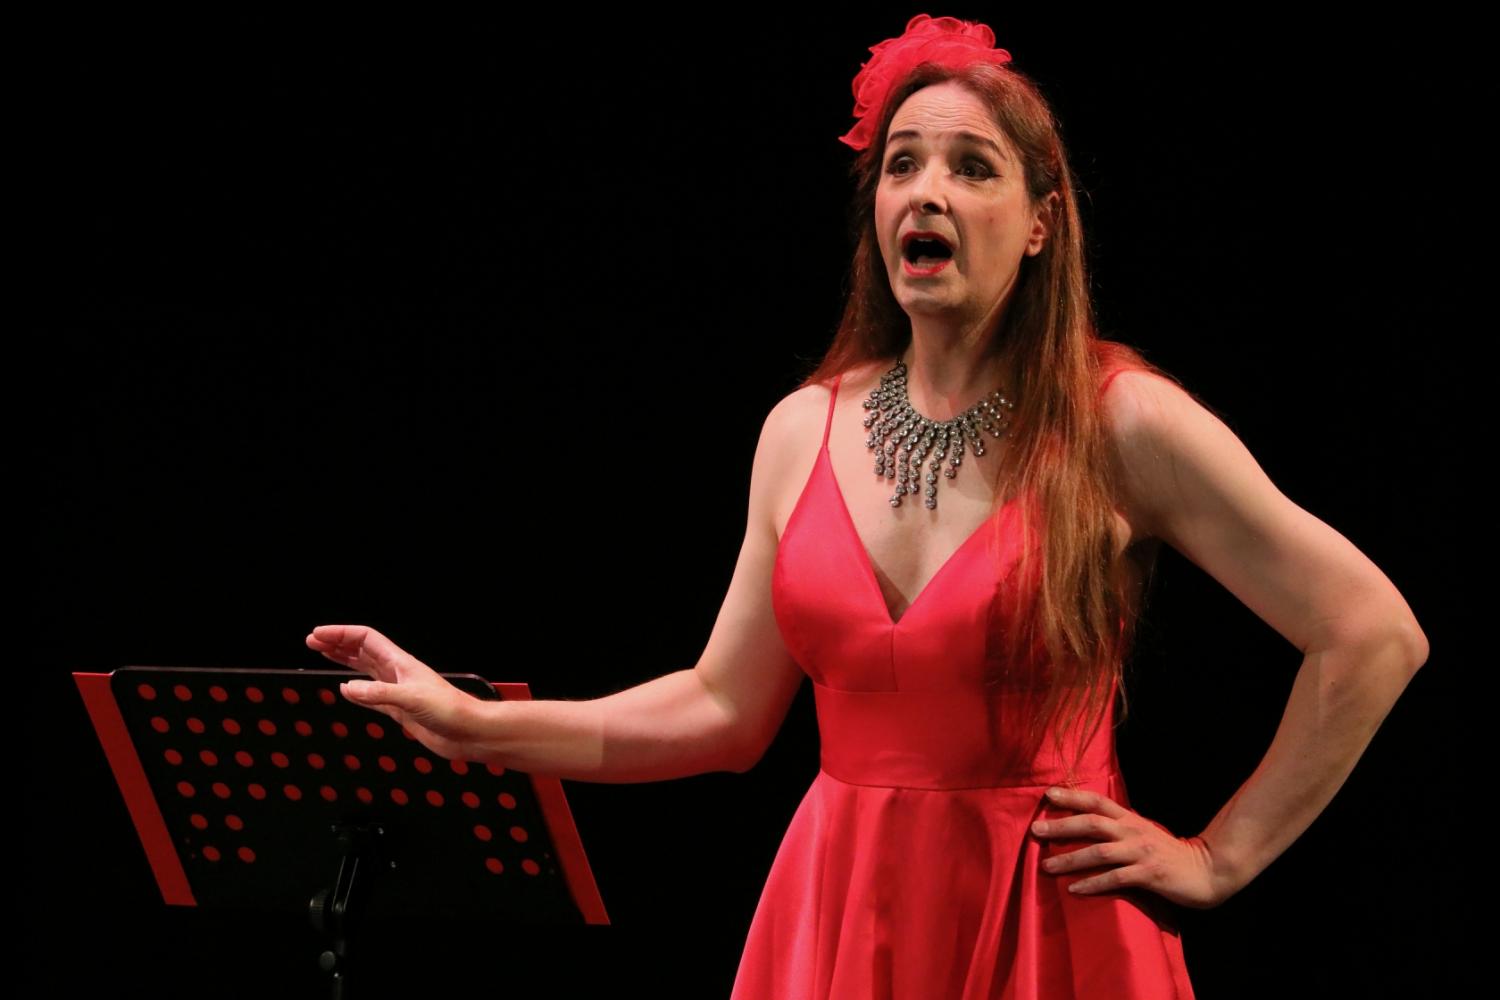 A woman with long brown hair stands in a red evening dress, before a music stand. Her mouth is open; she is singing.